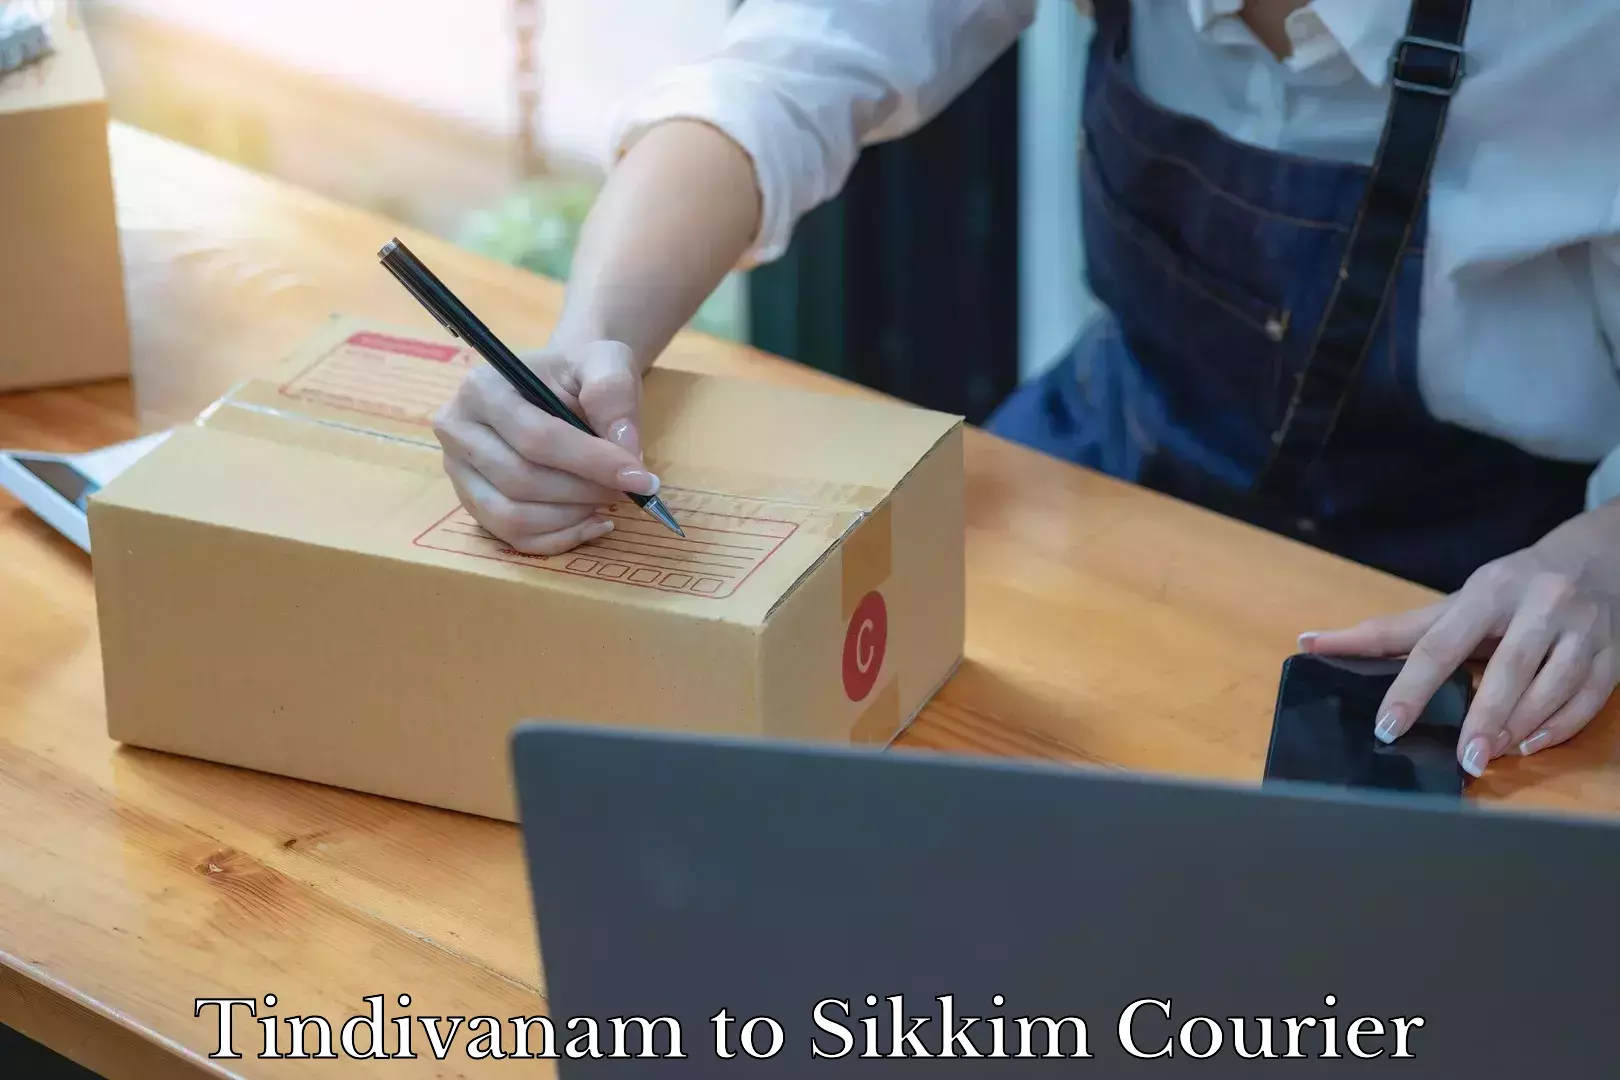 Furniture delivery service Tindivanam to Sikkim